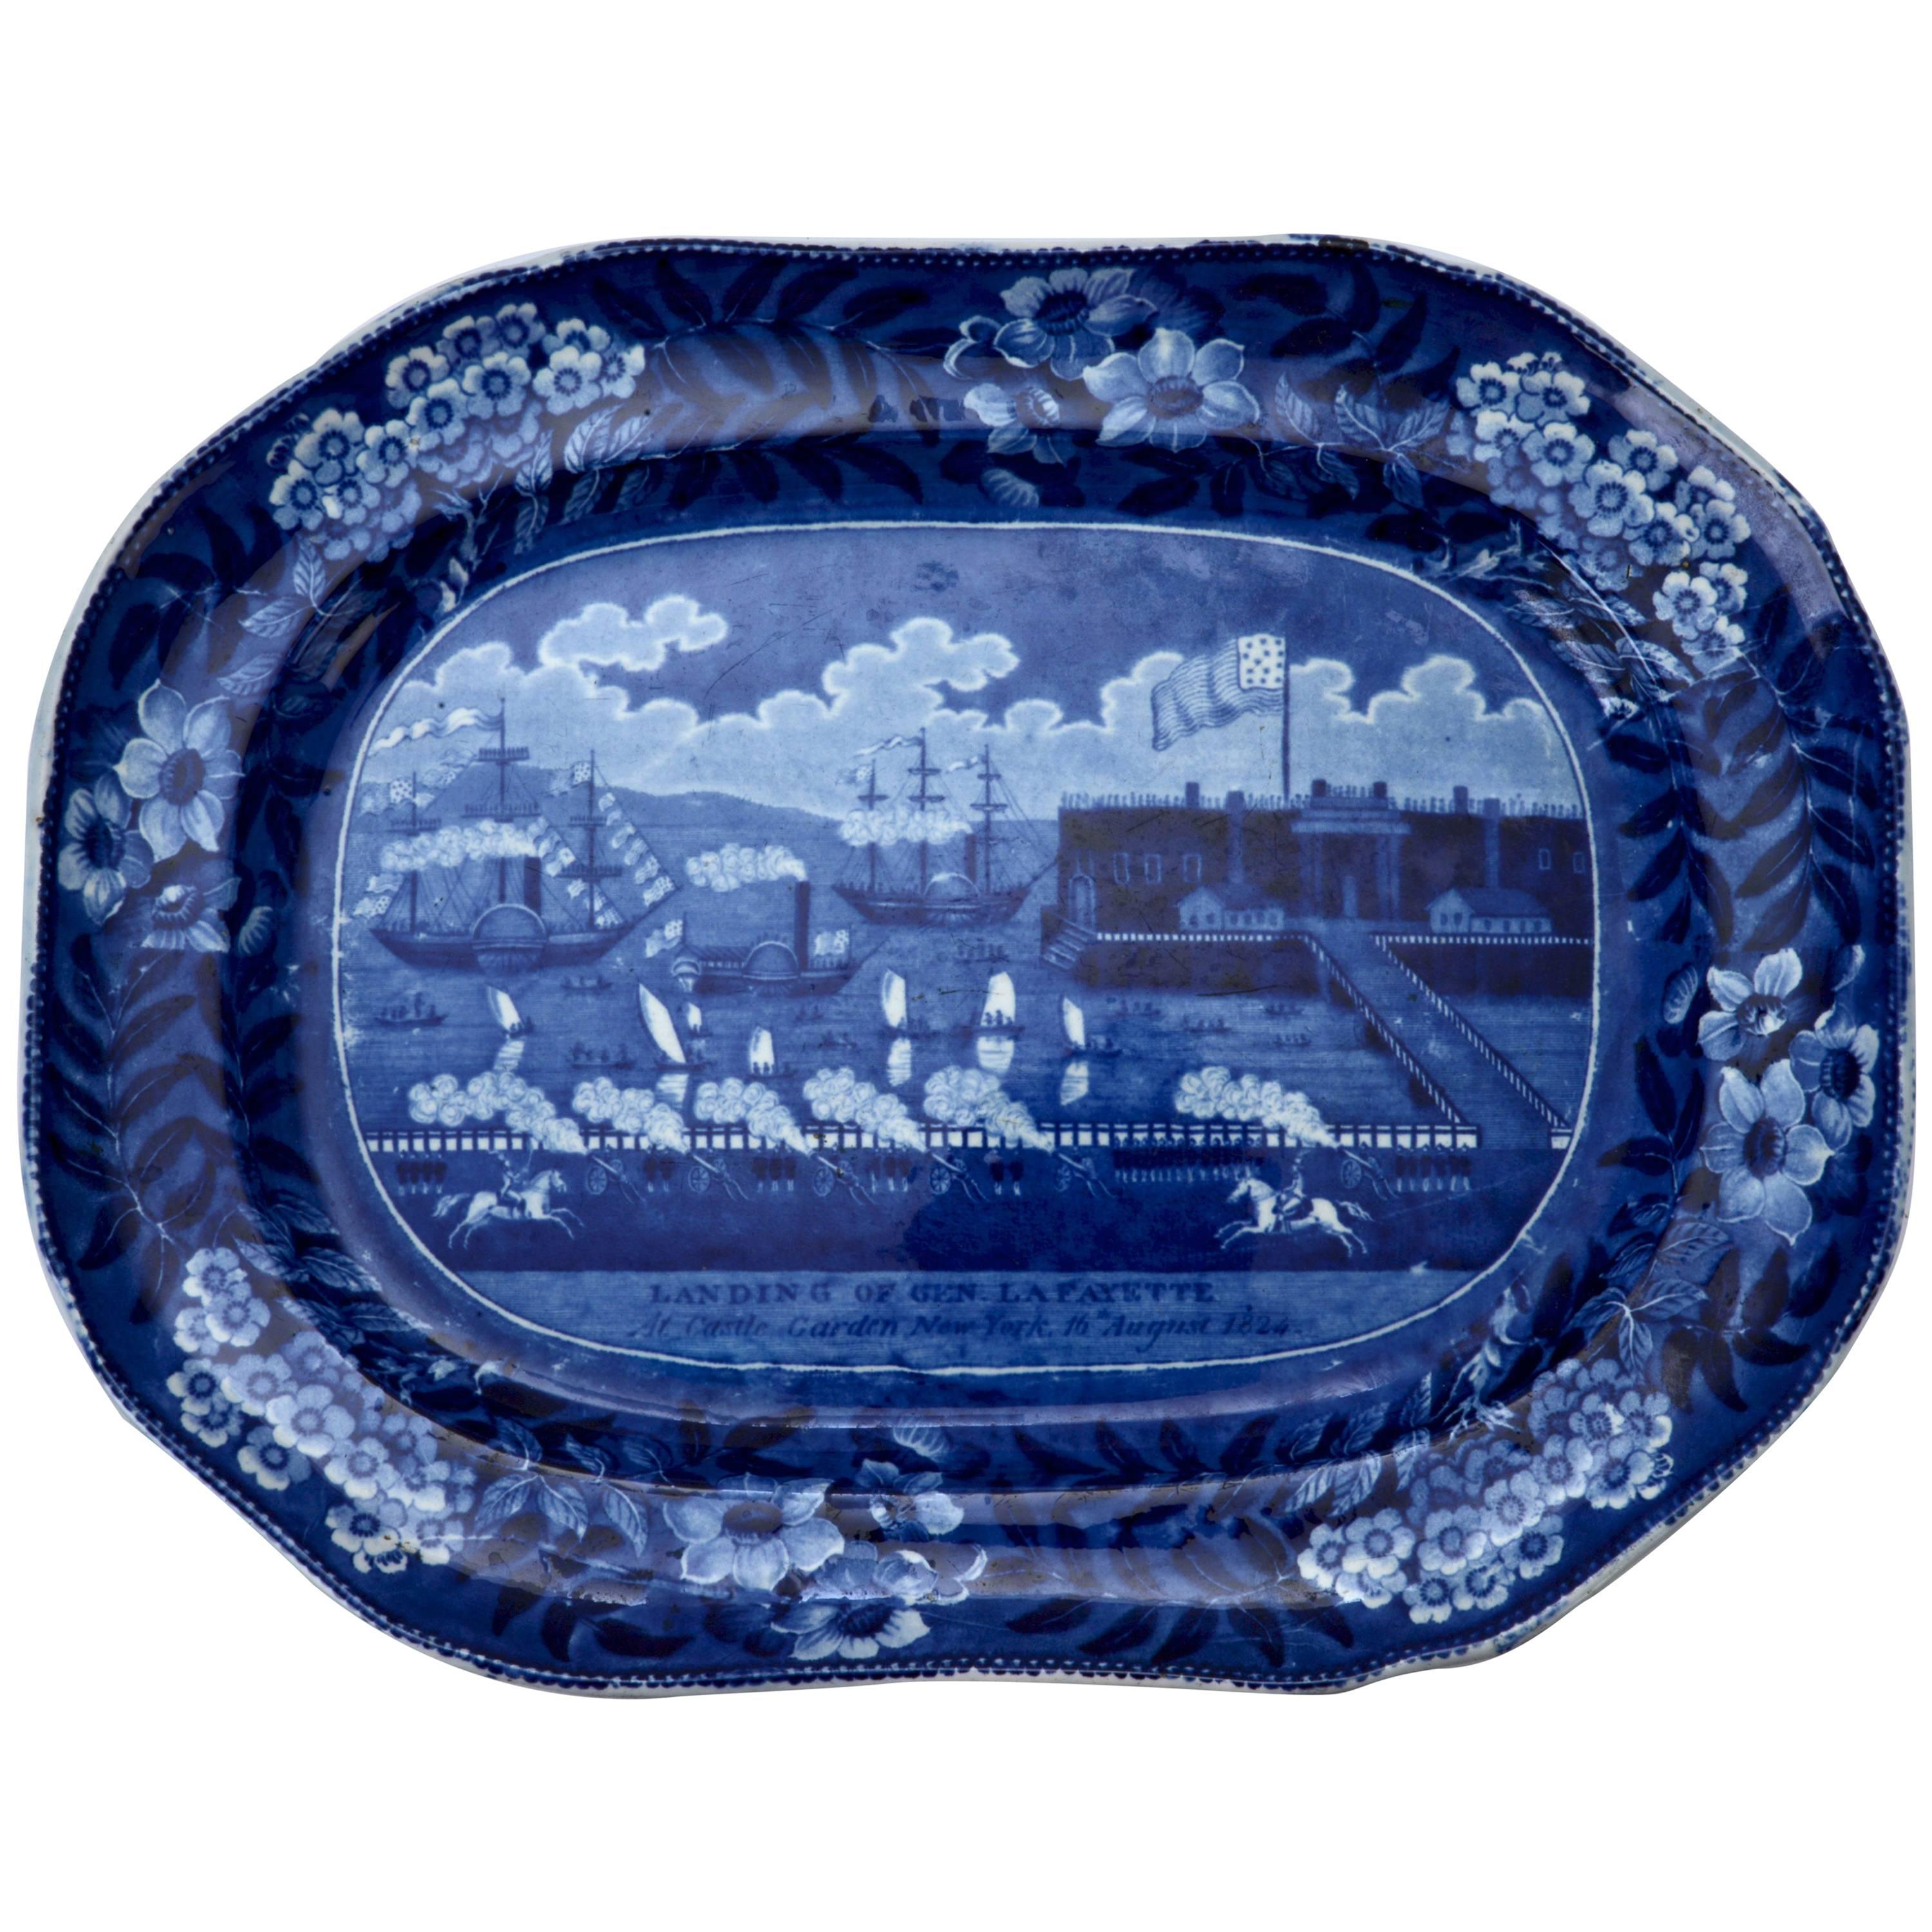 Landing of General Lafayette Staffordshire Platter by James & Ralph Clews